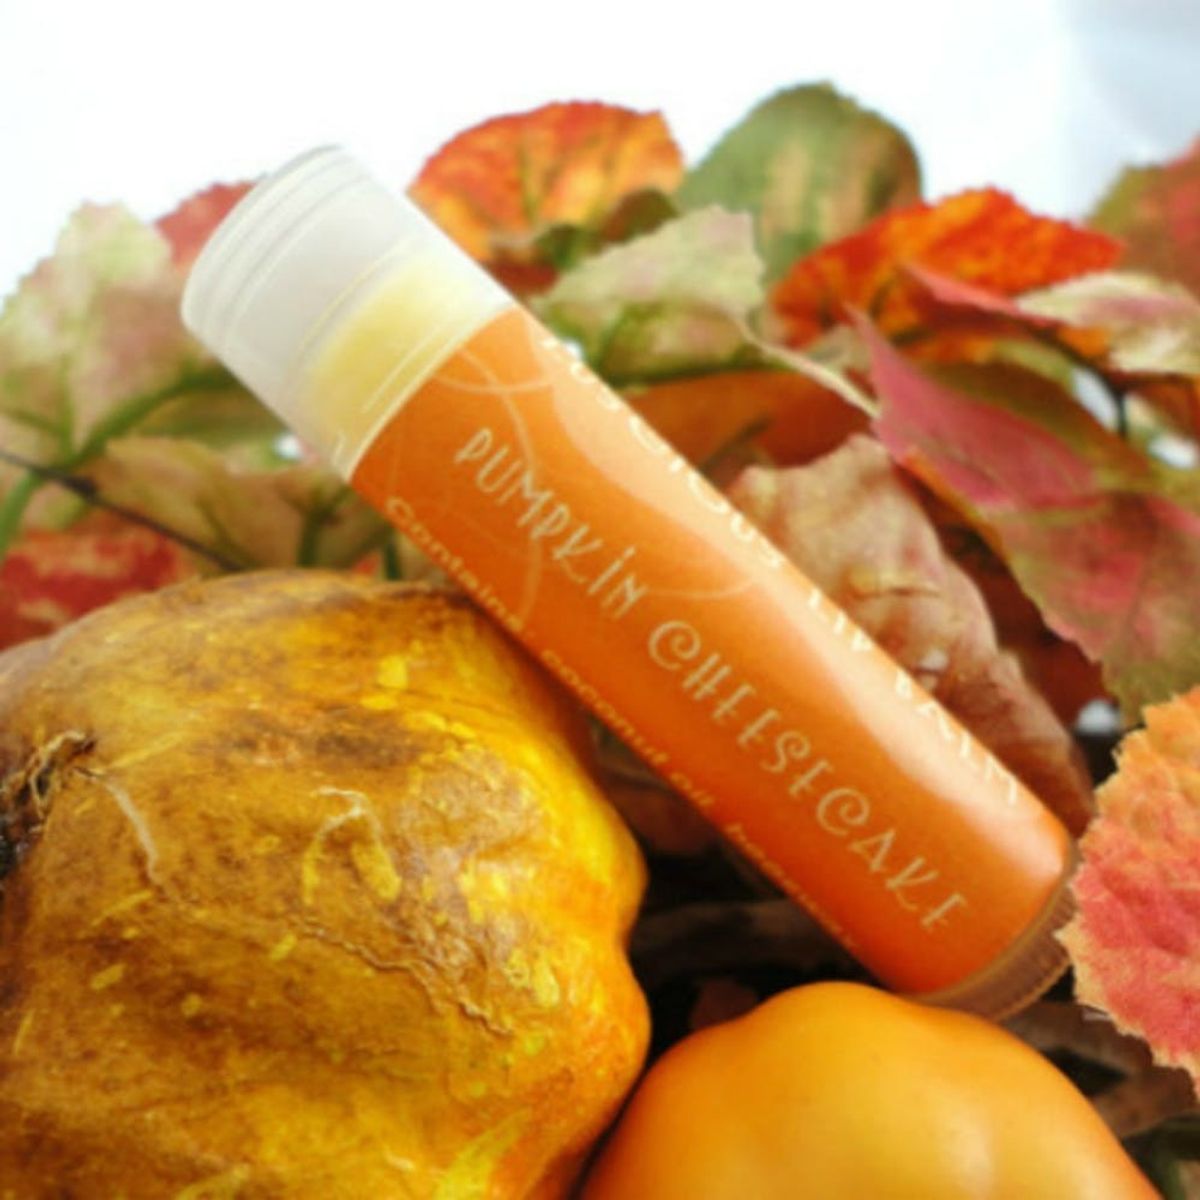 Pumpkin Lip Balm Is Here to Be Your New Holiday Beauty Obsession